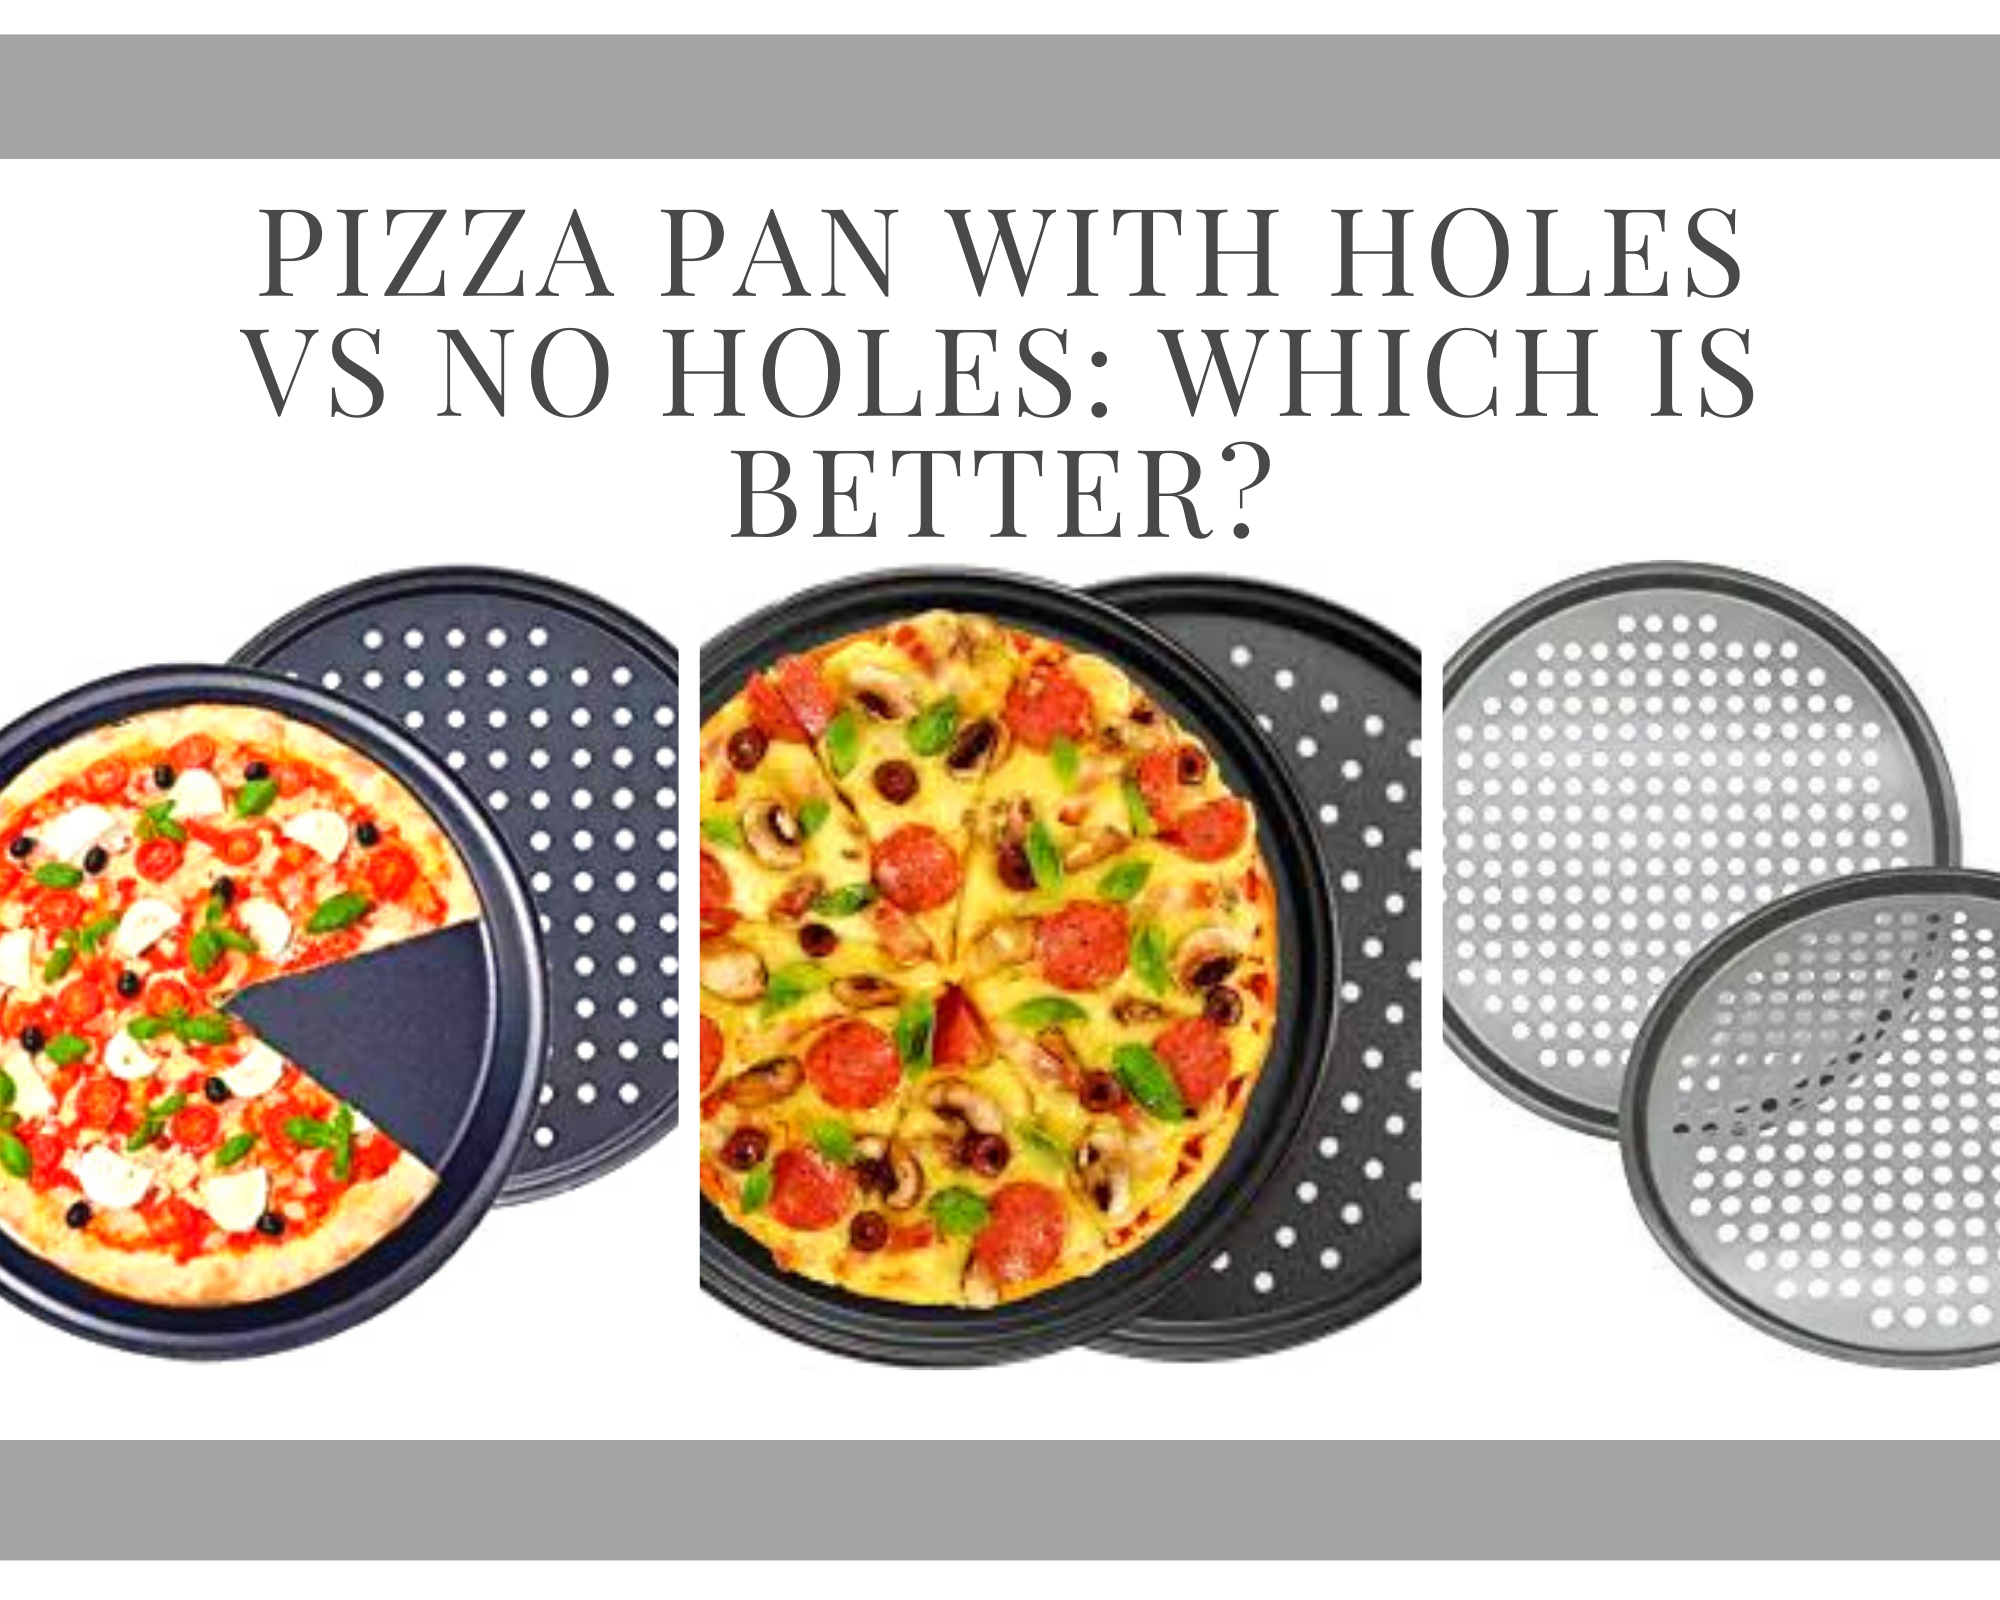 Pizza Pan With Holes Vs No Holes: Perfectly Cooked Pizza